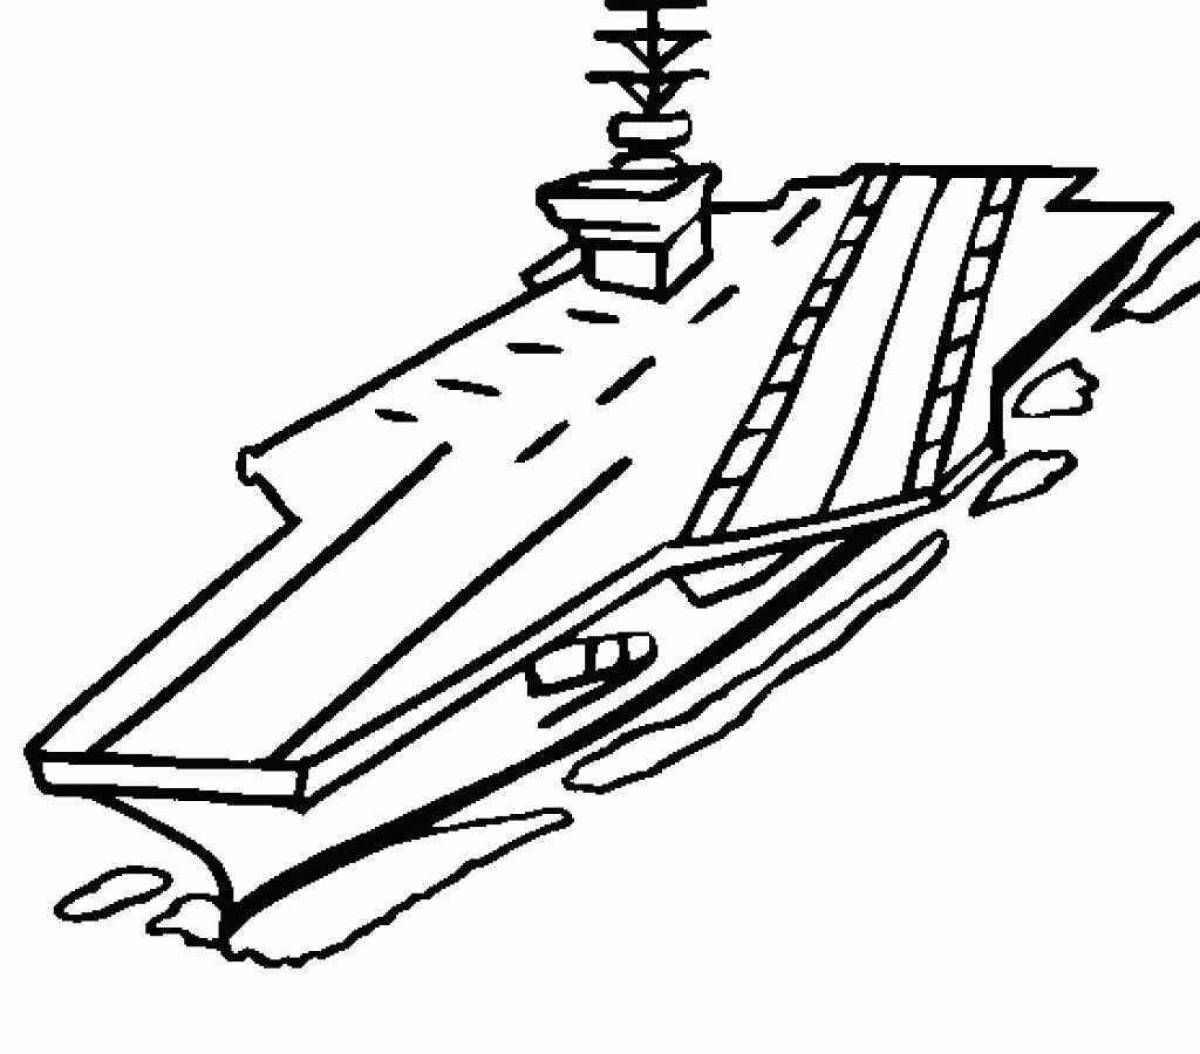 Fabulous aircraft carrier coloring page